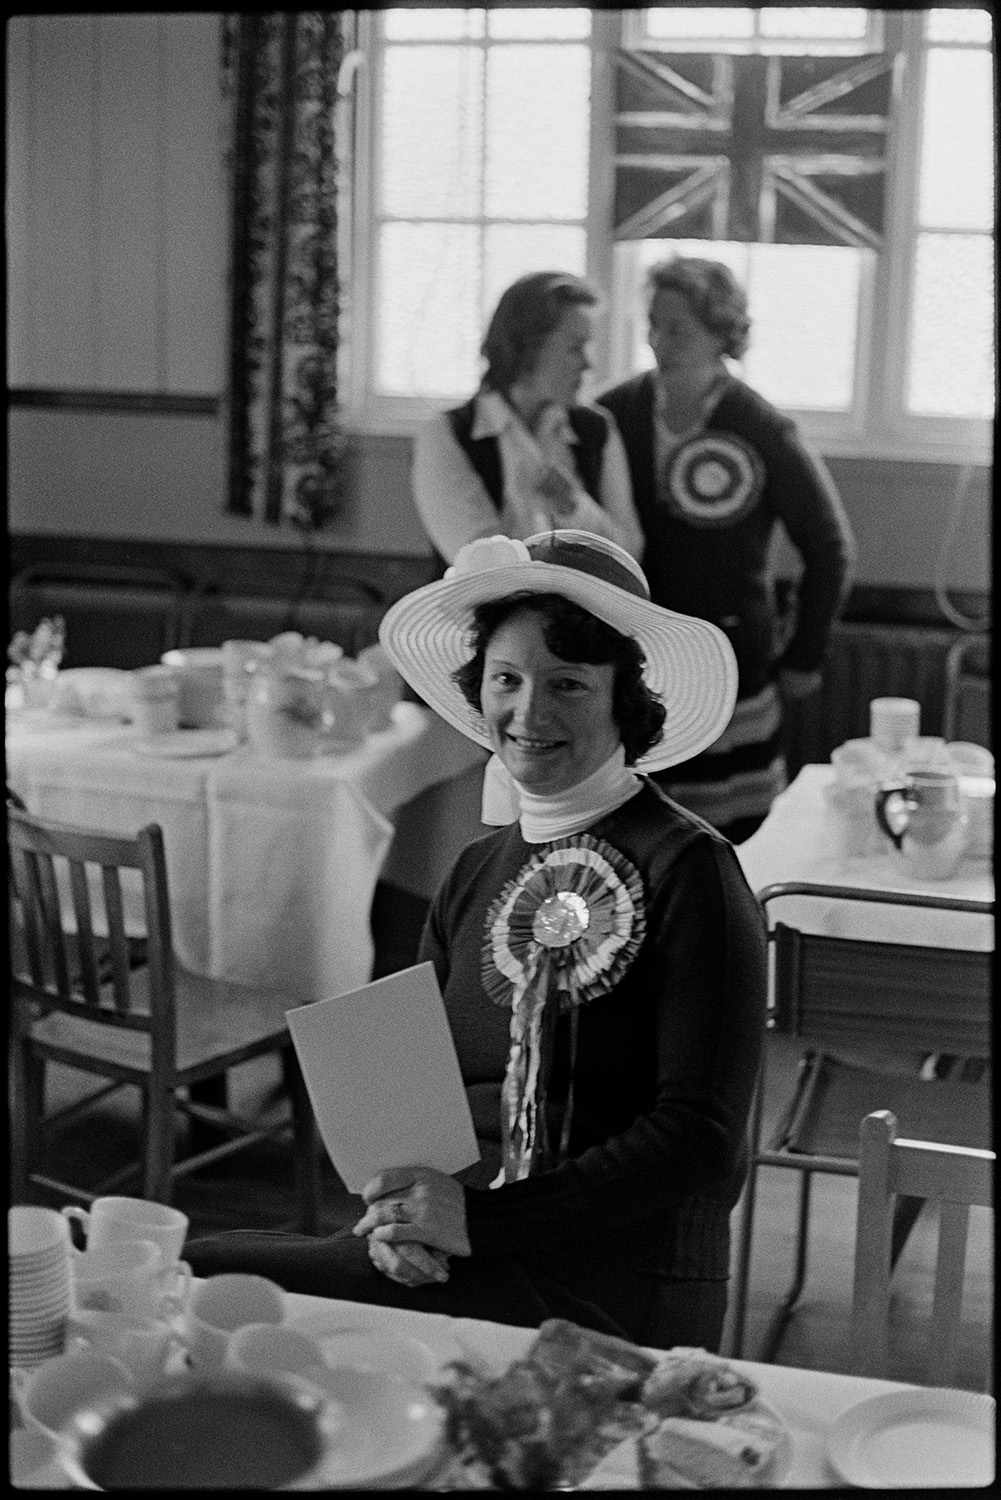 Group of women, in village hall before Jubilee tea which they had prepared. 
[A woman sat at a table laid with tea and cake, which she helped to prepare, in High Bickington Village Hall to celebrate the Silver Jubilee of Queen Elizabeth II.  She is wearing a hat and rosette. Two other women are stood in the background by a Union Jack flag.]